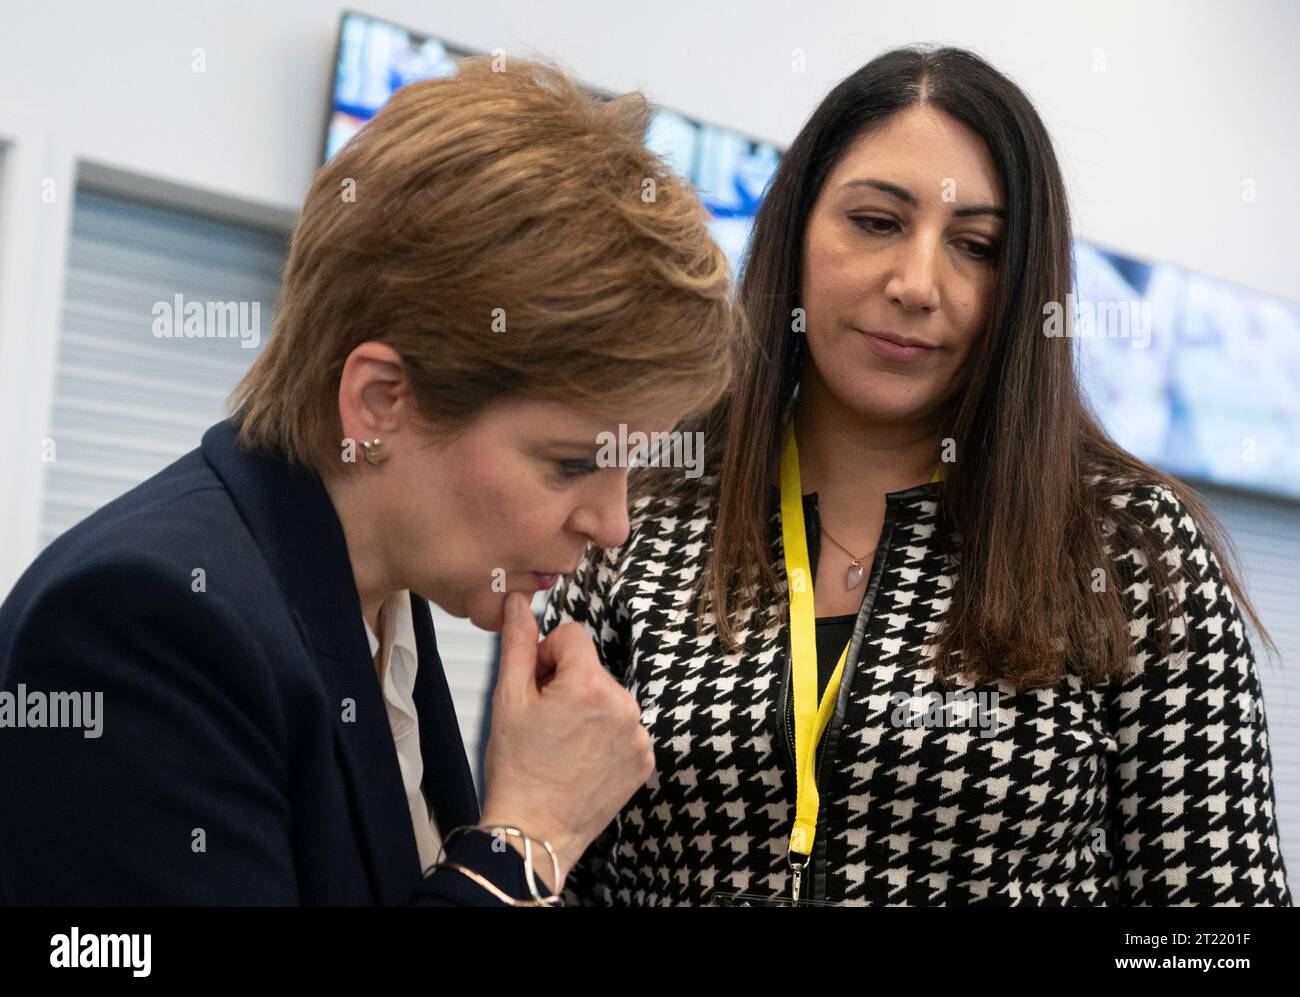 Aberdeen, Scotland, UK. 16th October 2023.  Day two of the SNP annual conference and former First Minister Nicola Sturgeon makes an appearance. A media frenzy followed before she made her way into the conference venue to listen to the afternoon’s proceedings.  Nicola Sturgeon has quiet words with wife of Humza Yousaf Nadia El-Nakla. Iain Masterton/Alamy Live News Stock Photo